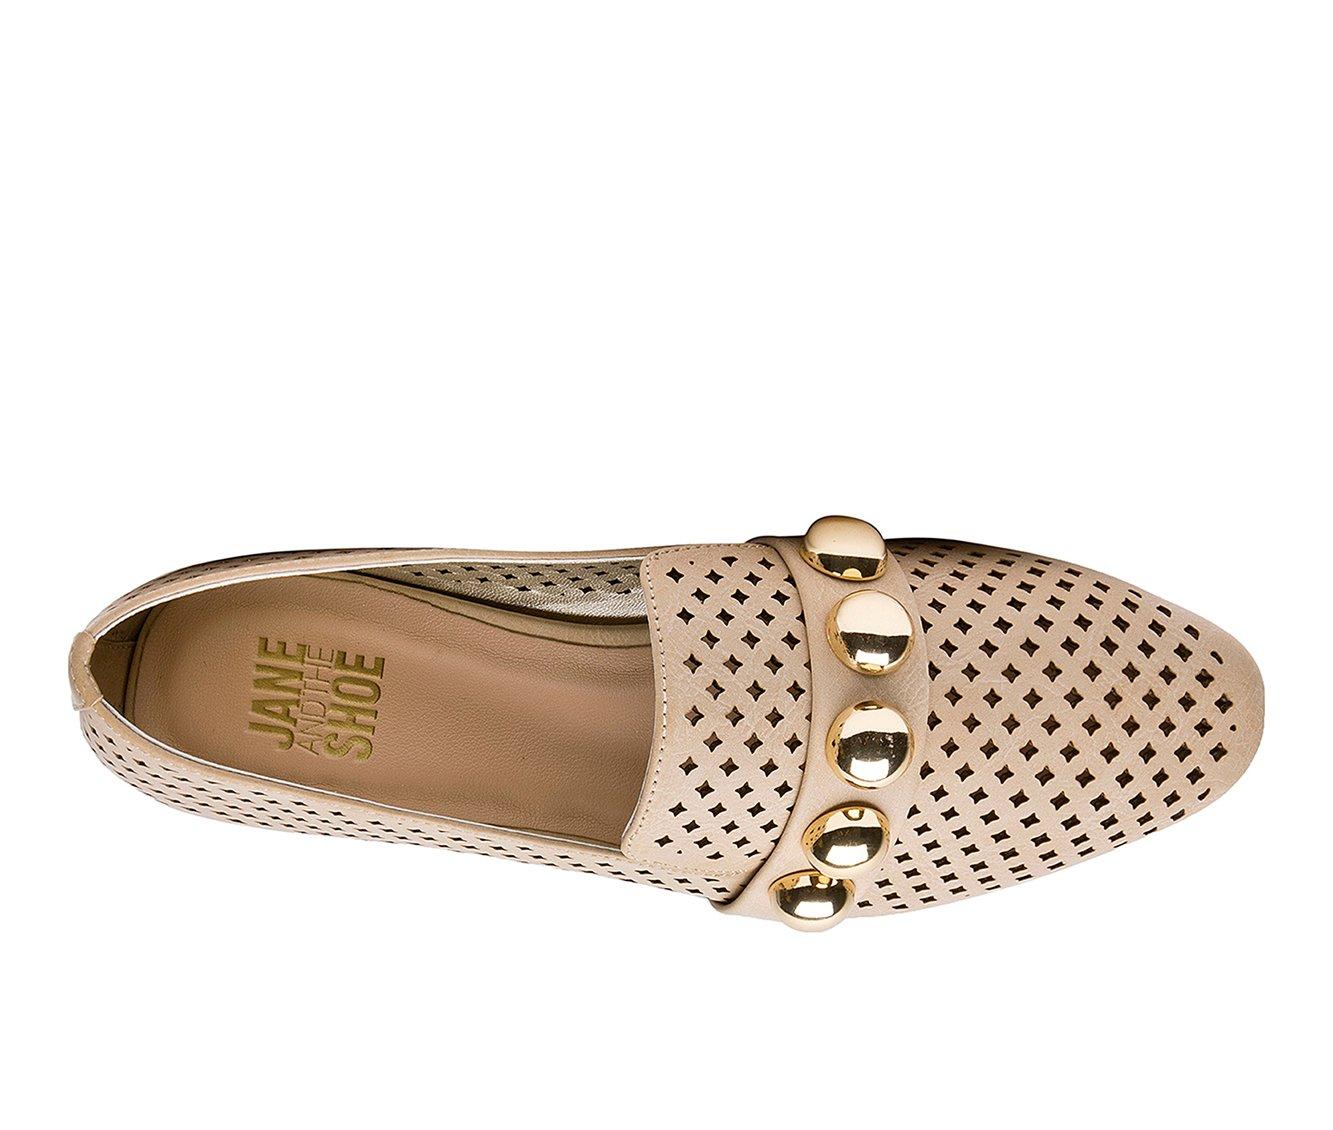 Women's Jane And The Shoe Peyton Loafers